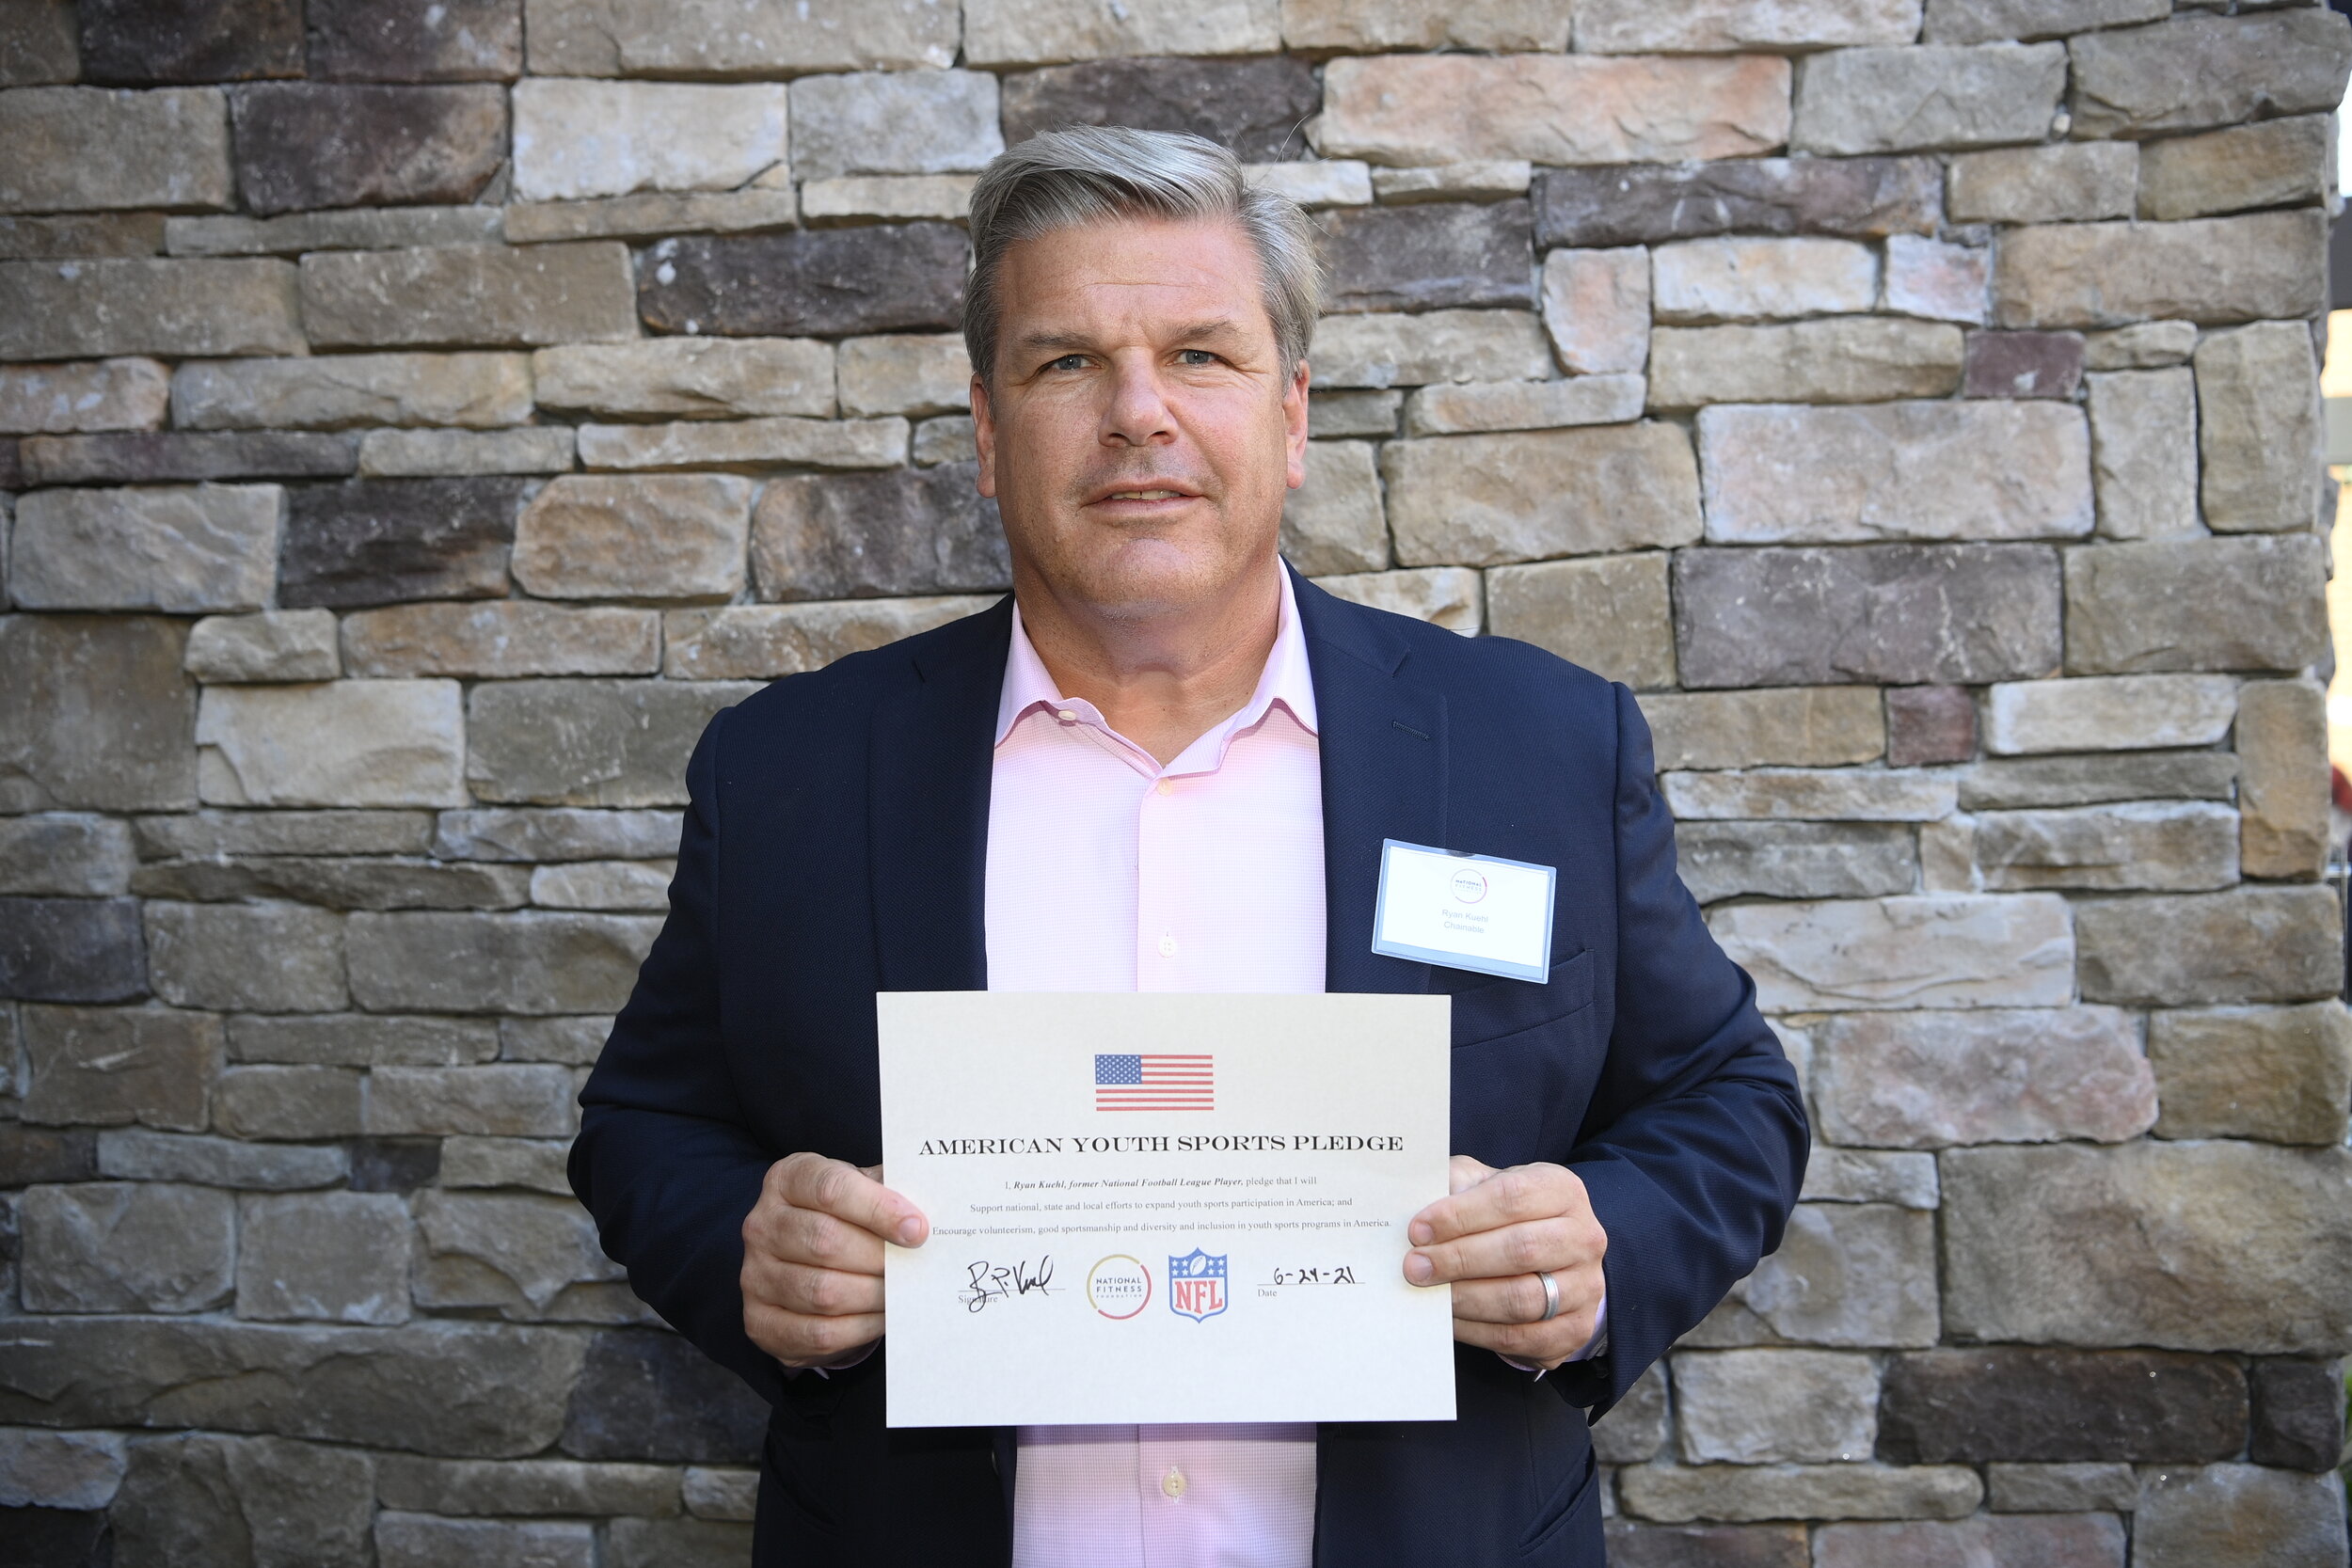  Ryan Kuehl, former NFL player, takes the American Youth Sports Pledge. 